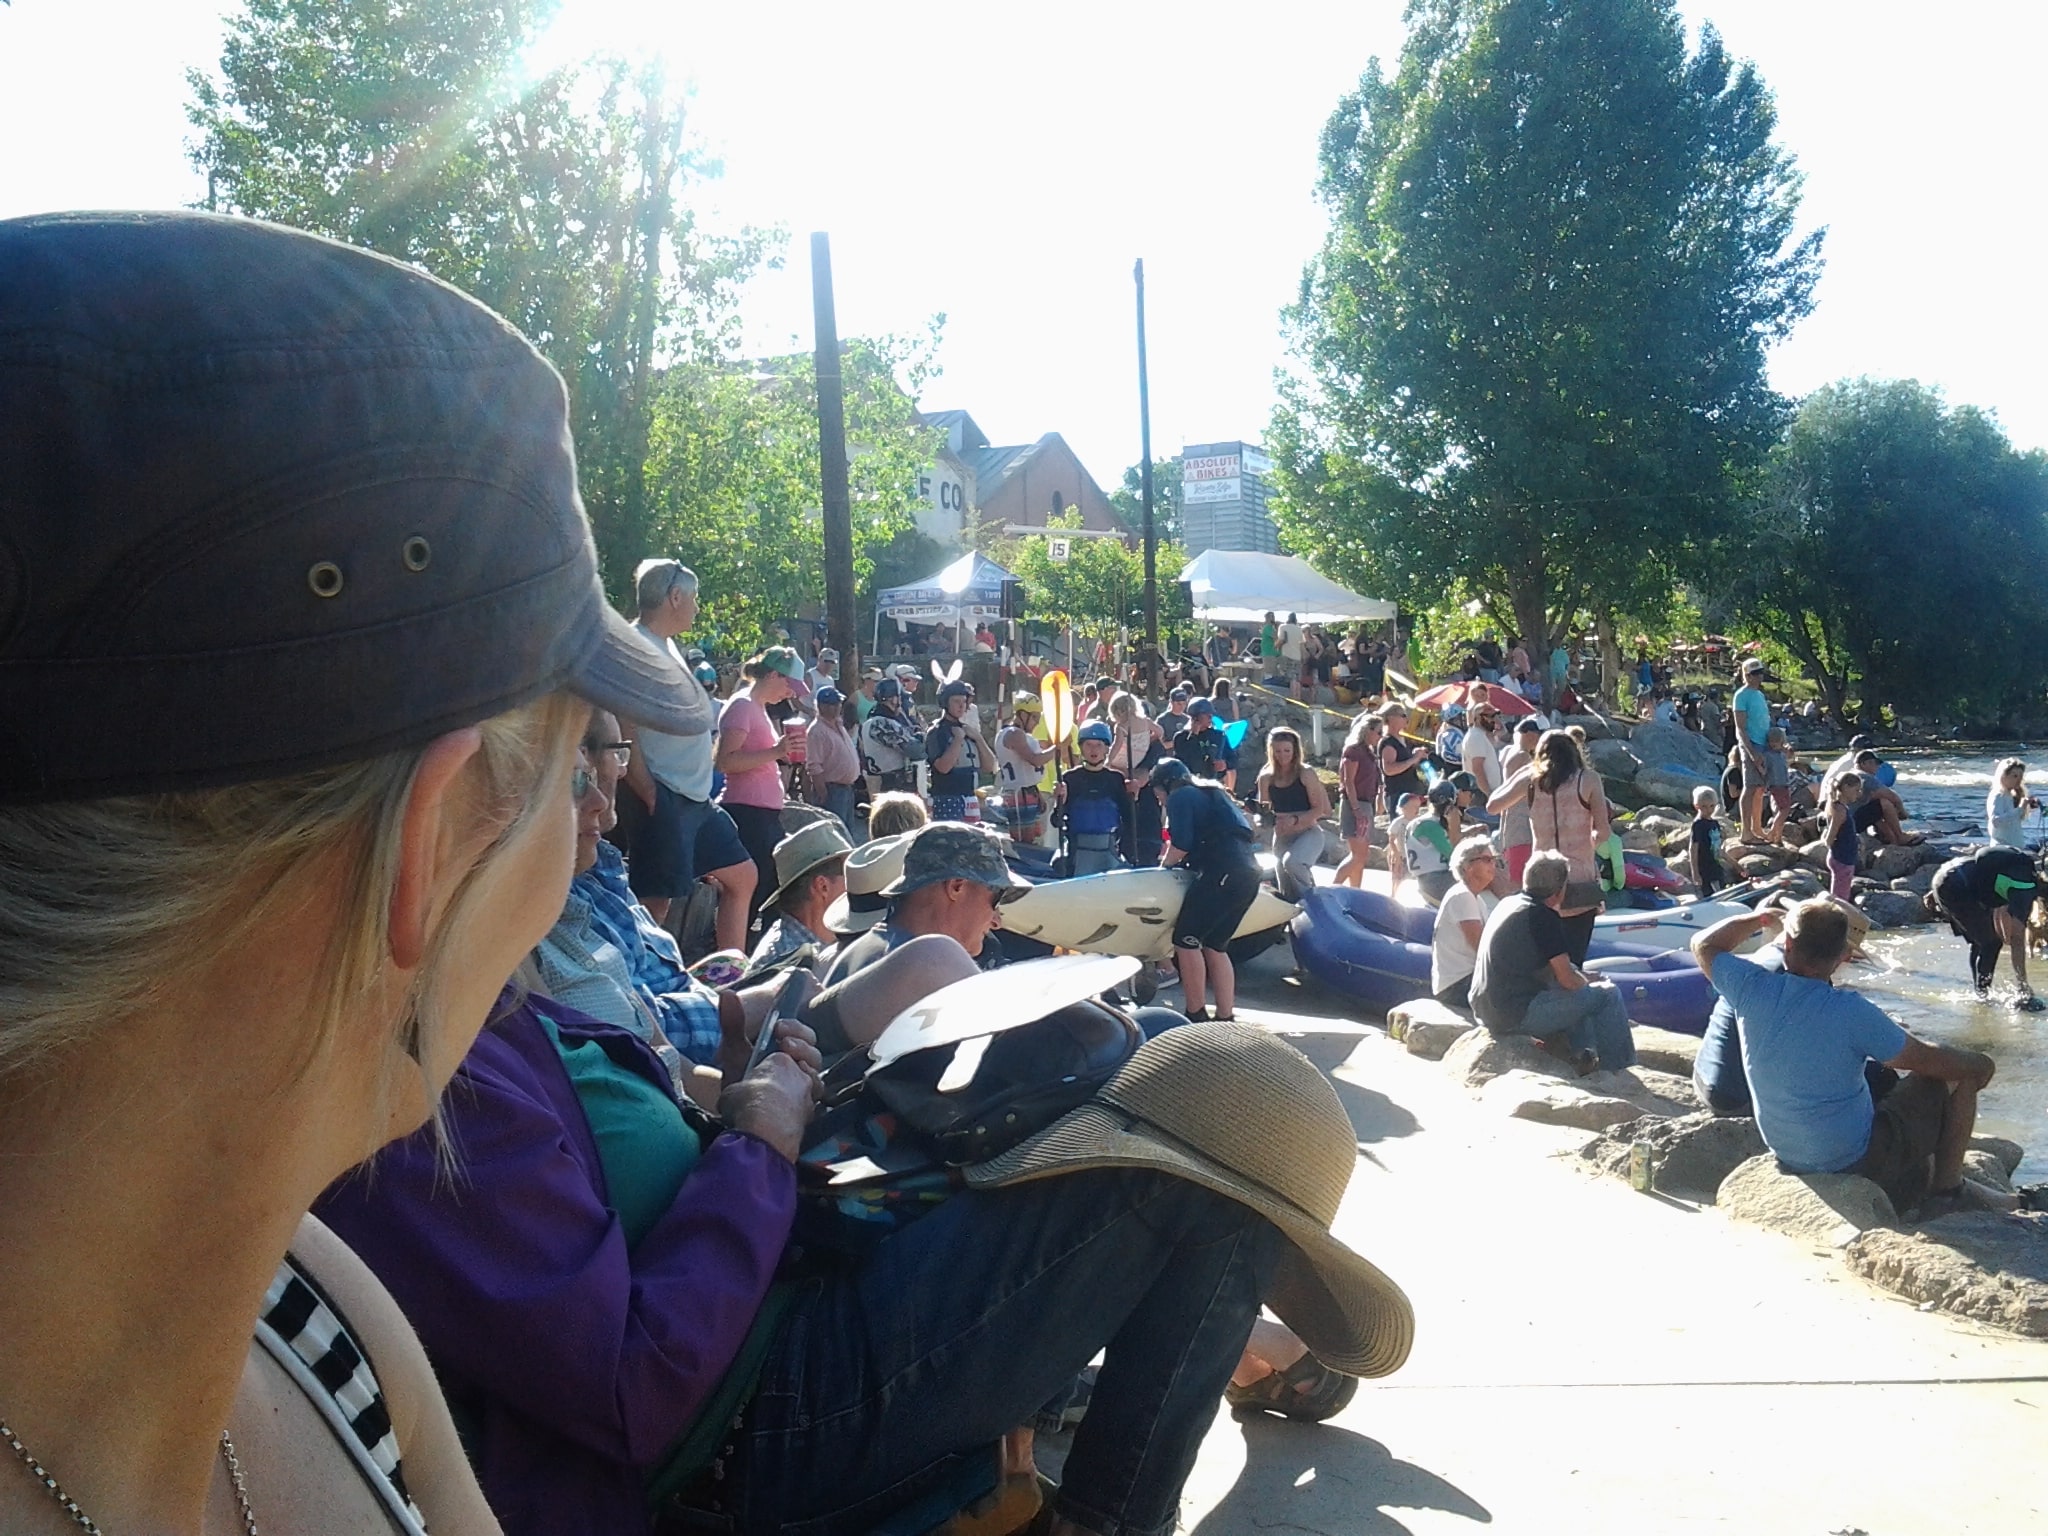 Lots of spectators sitting along the river bank watching the whitewater festival on a sunny day.